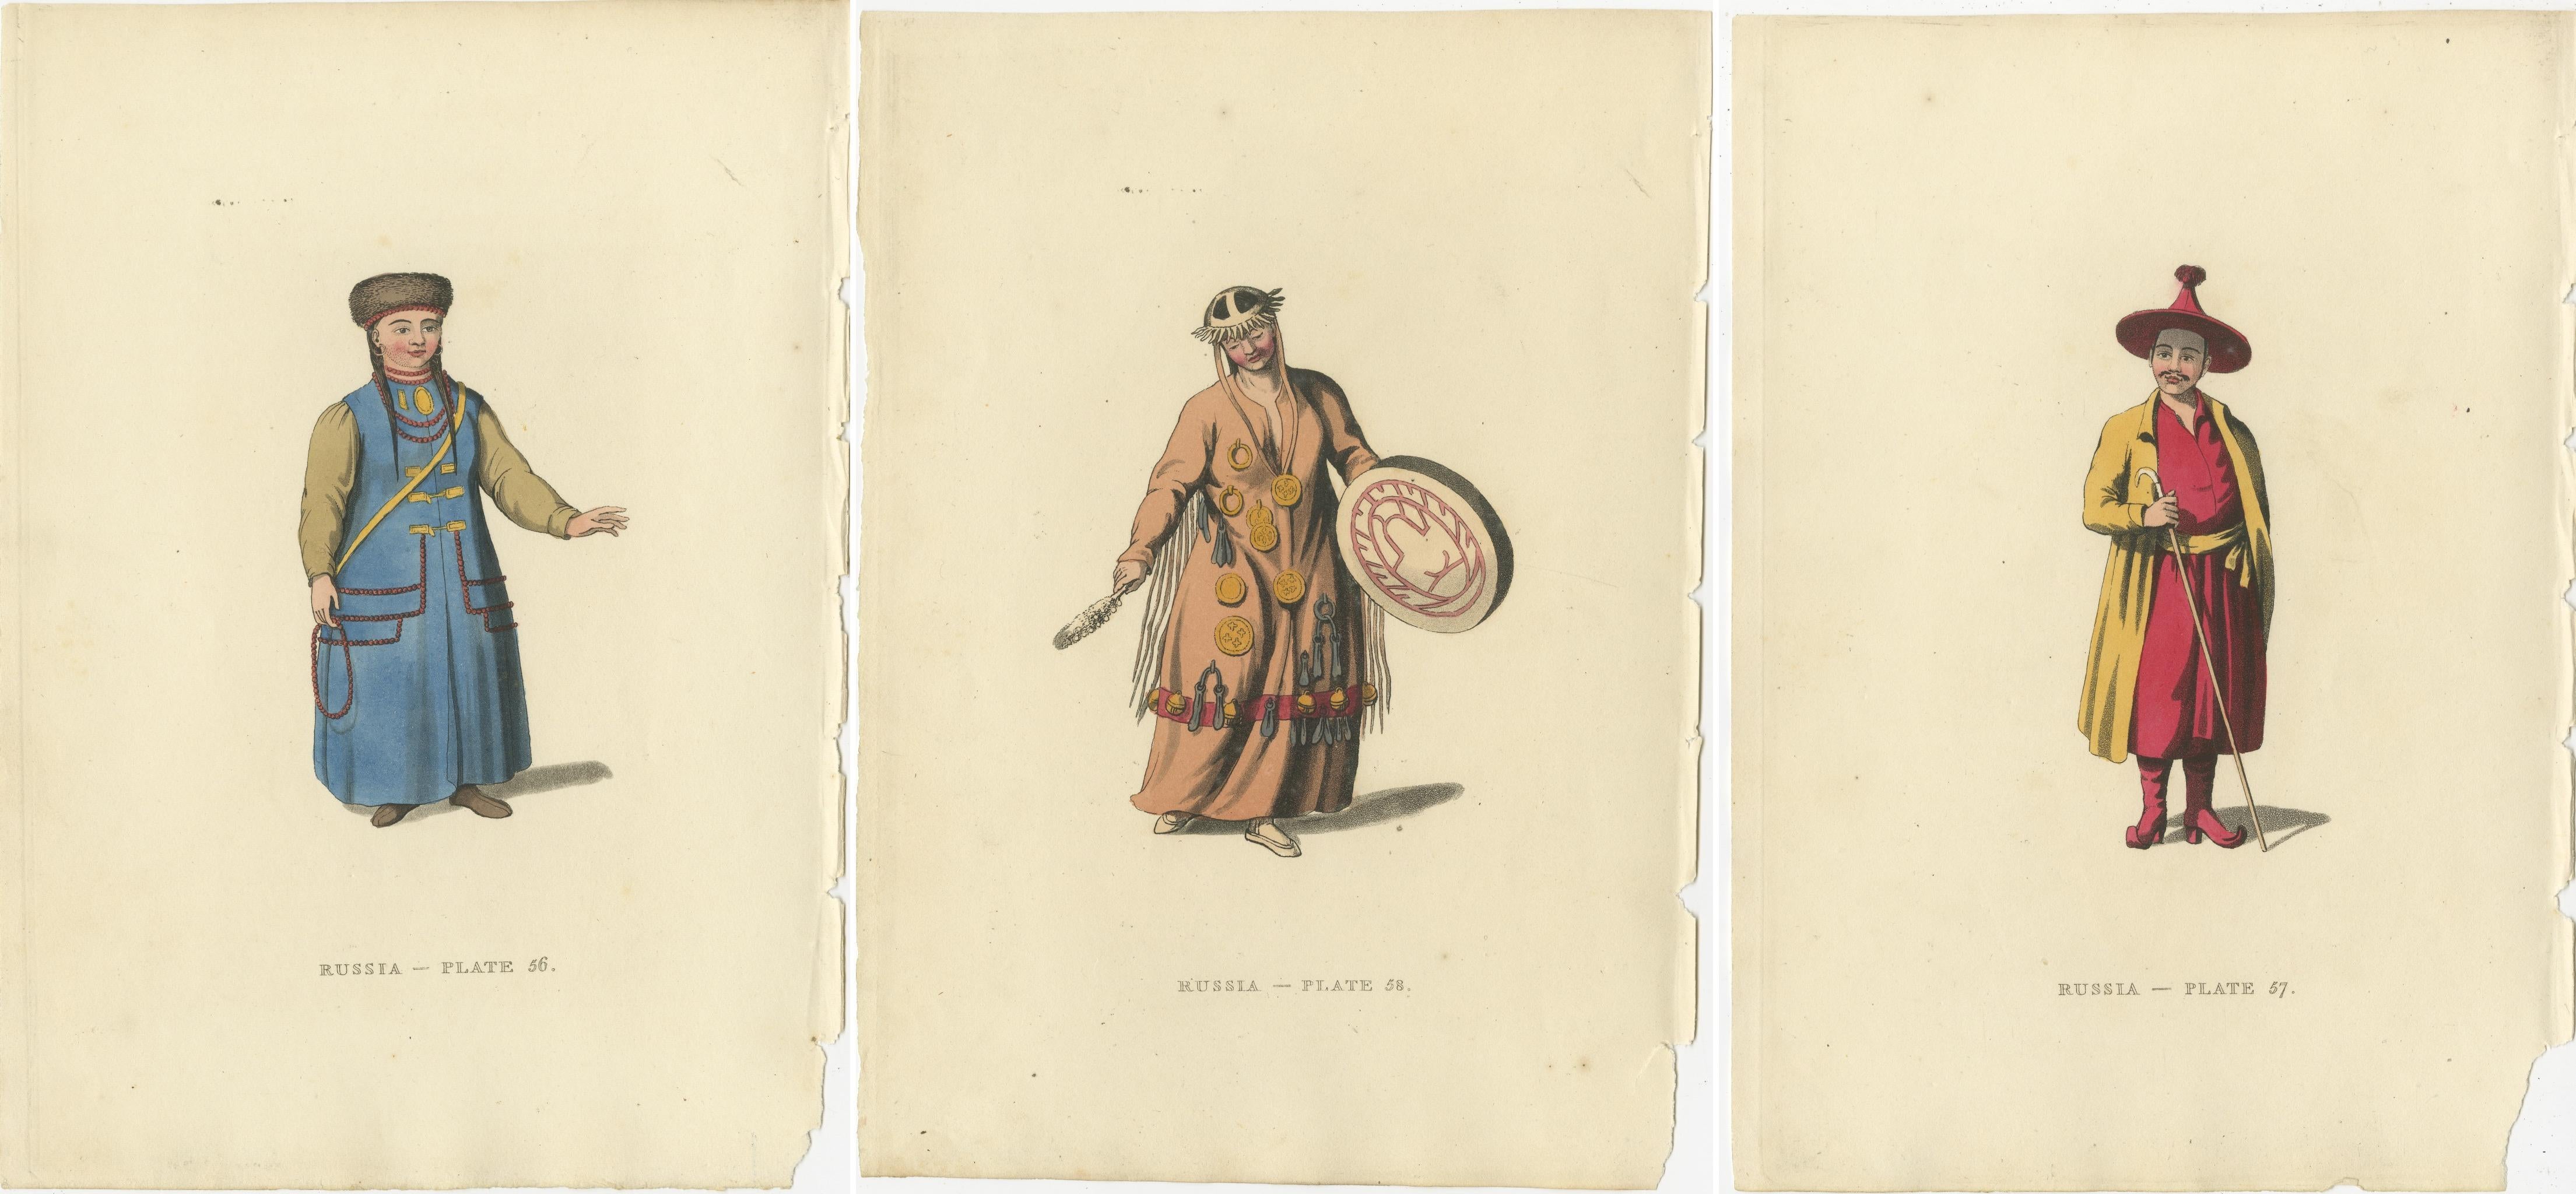 Paper Traditional Mongolian Attire in Alexander's Russian Ethnographic Engraving, 1814 For Sale